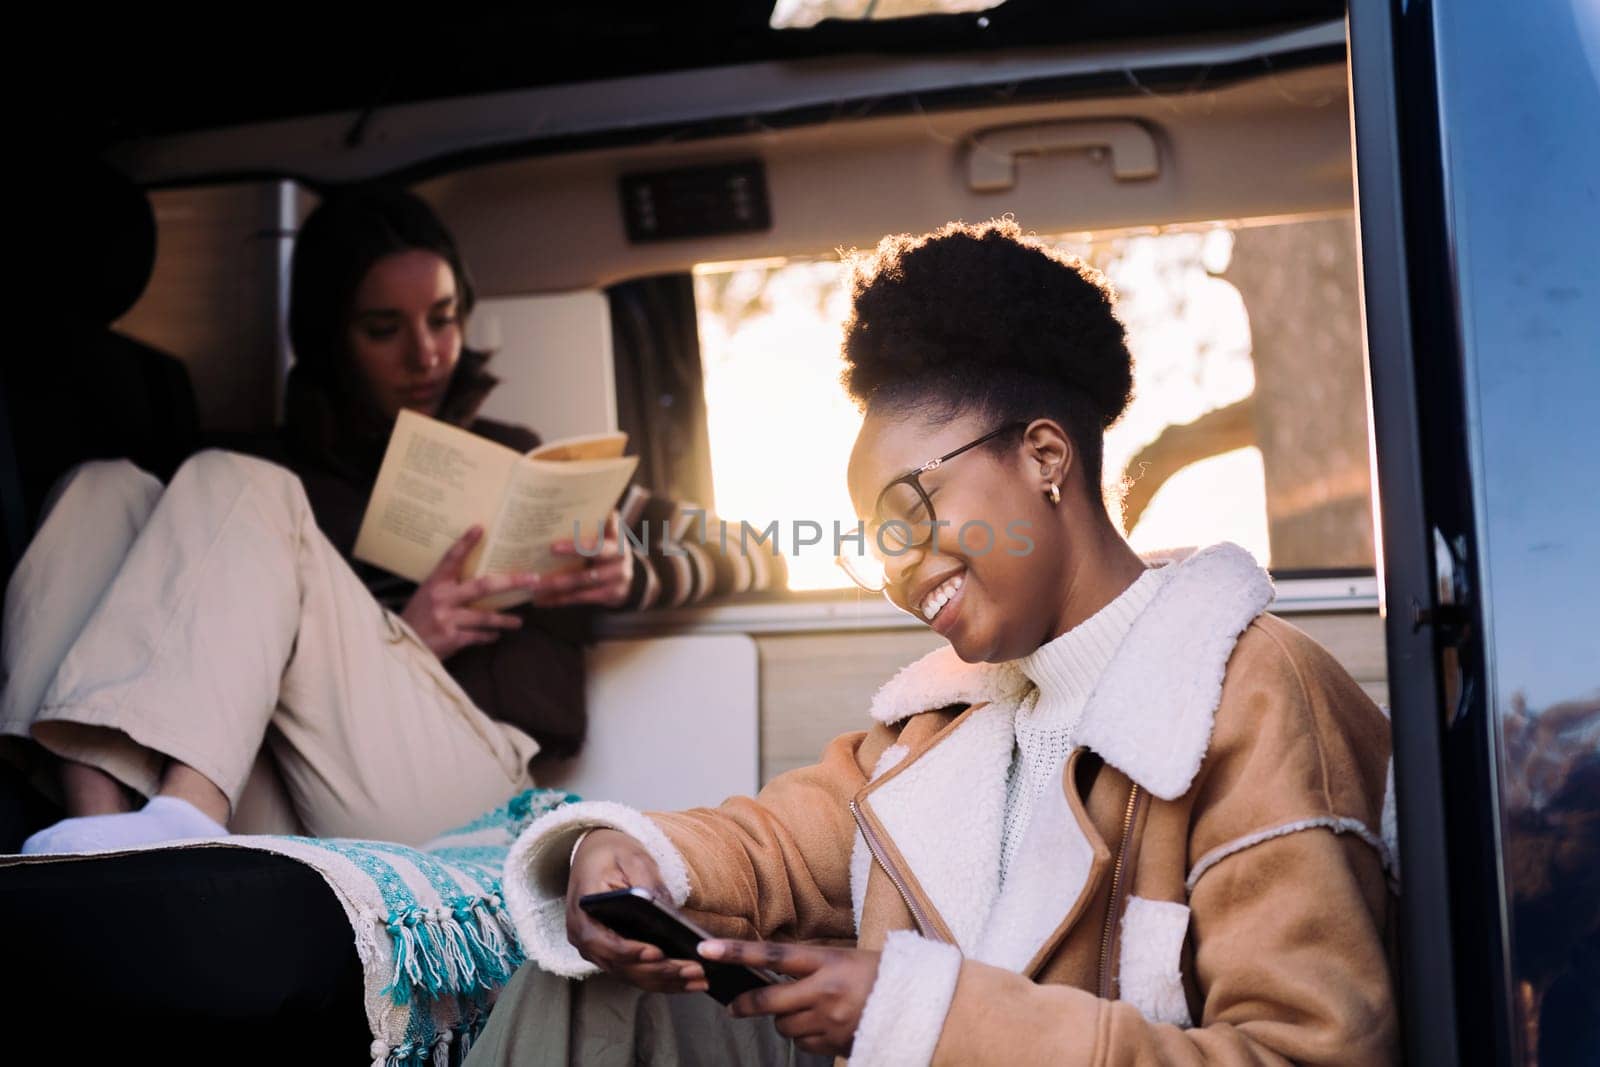 smiling african woman chilling checking phone at sunset during a road trip in camper van with a friend, concept of adventure travel with friend and technology of communication